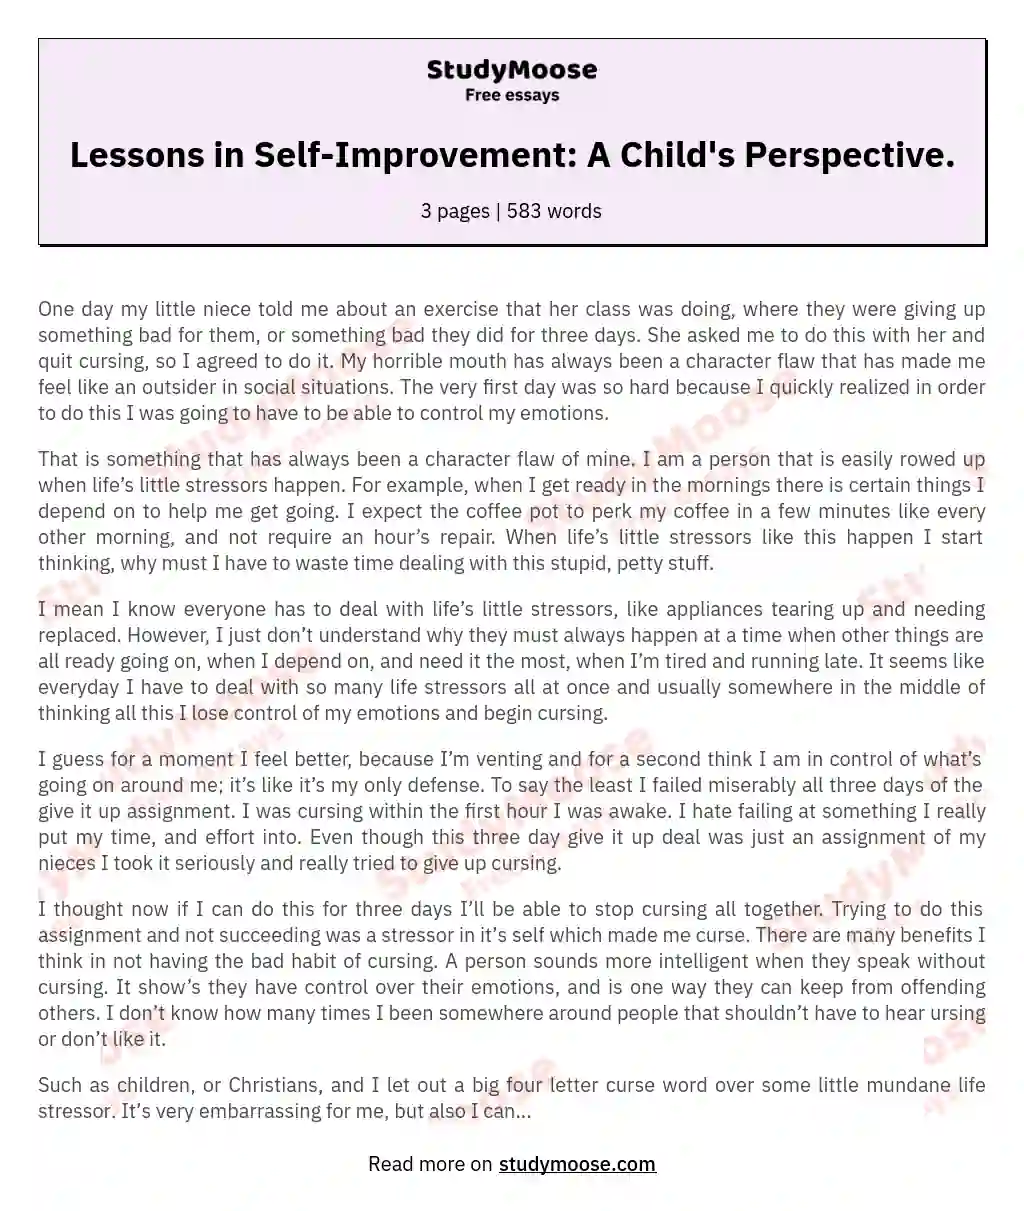 Lessons in Self-Improvement: A Child's Perspective essay